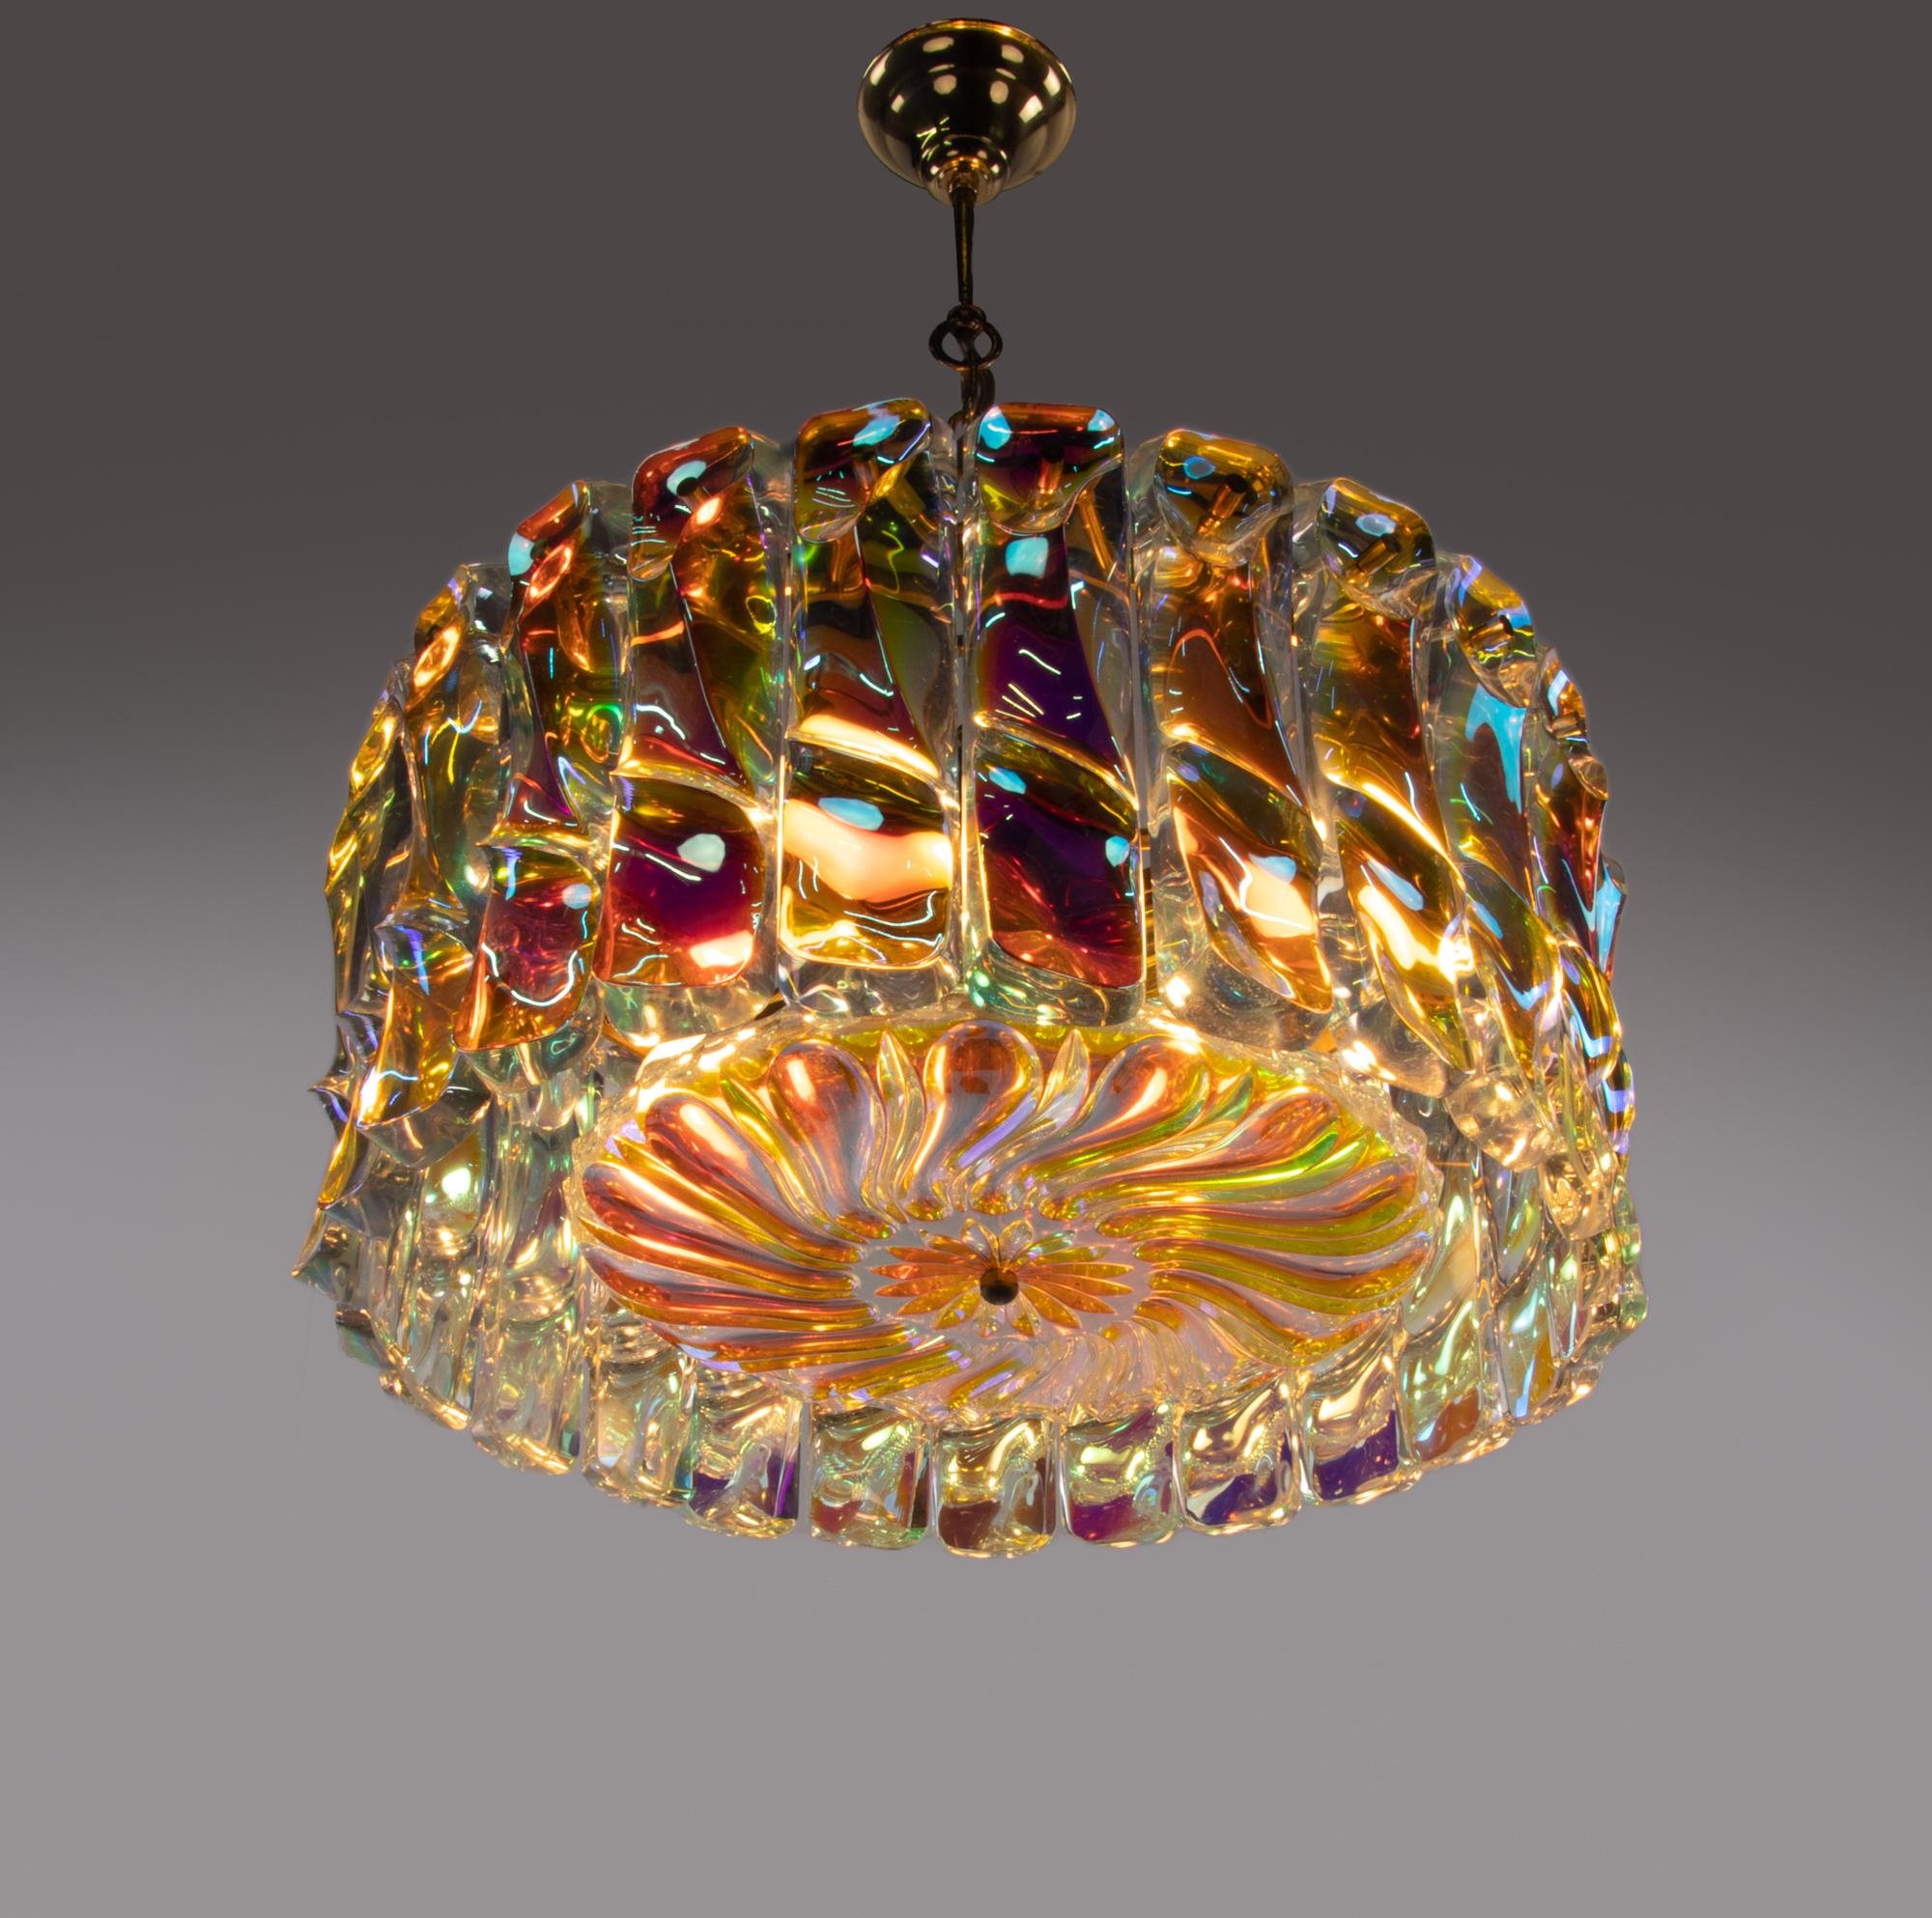 1960 Italy Glamorous Chandelier with Iridescent Venini Murano Glass & Brass For Sale 2